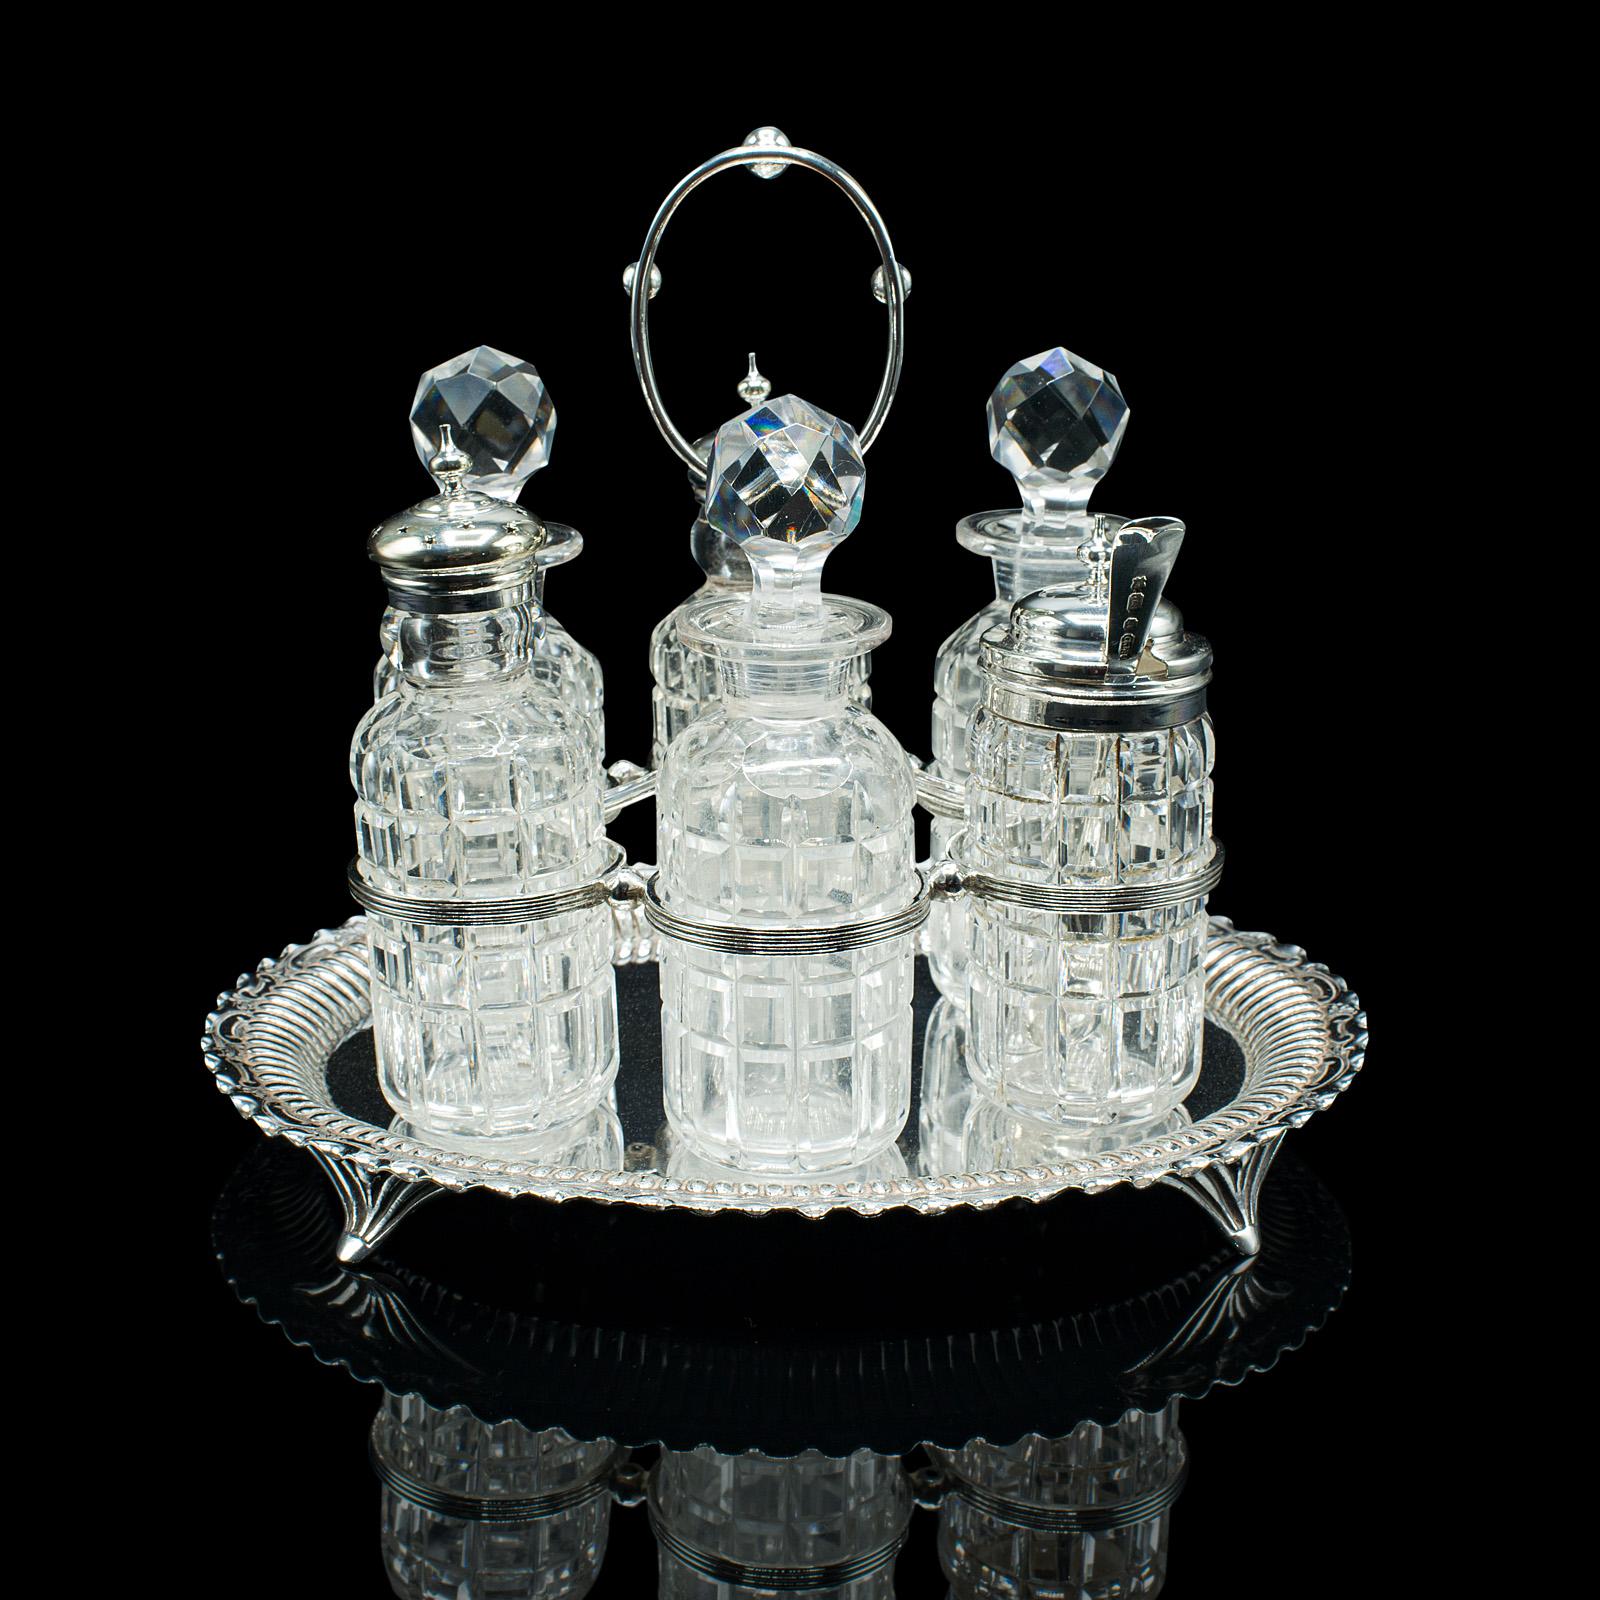 This is an antique table condiment set. An English, silver plate and glass cruet, dating to the Victorian period and later, circa 1900.

Dashing 6 piece table set presented upon an attractive tray
Displaying a desirable aged patina